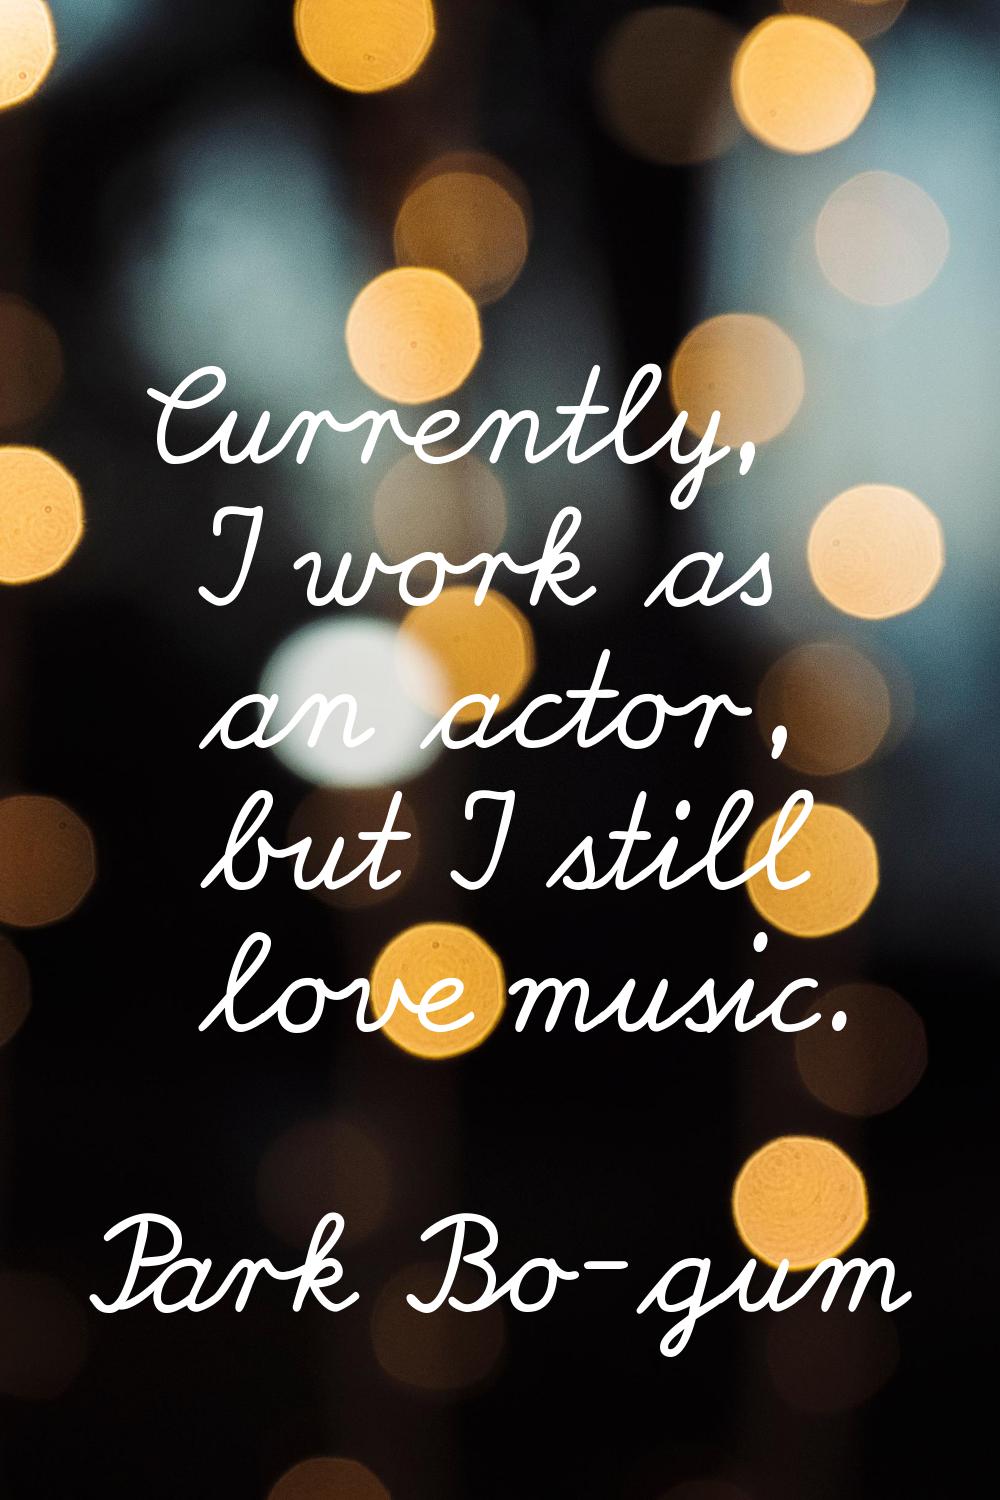 Currently, I work as an actor, but I still love music.